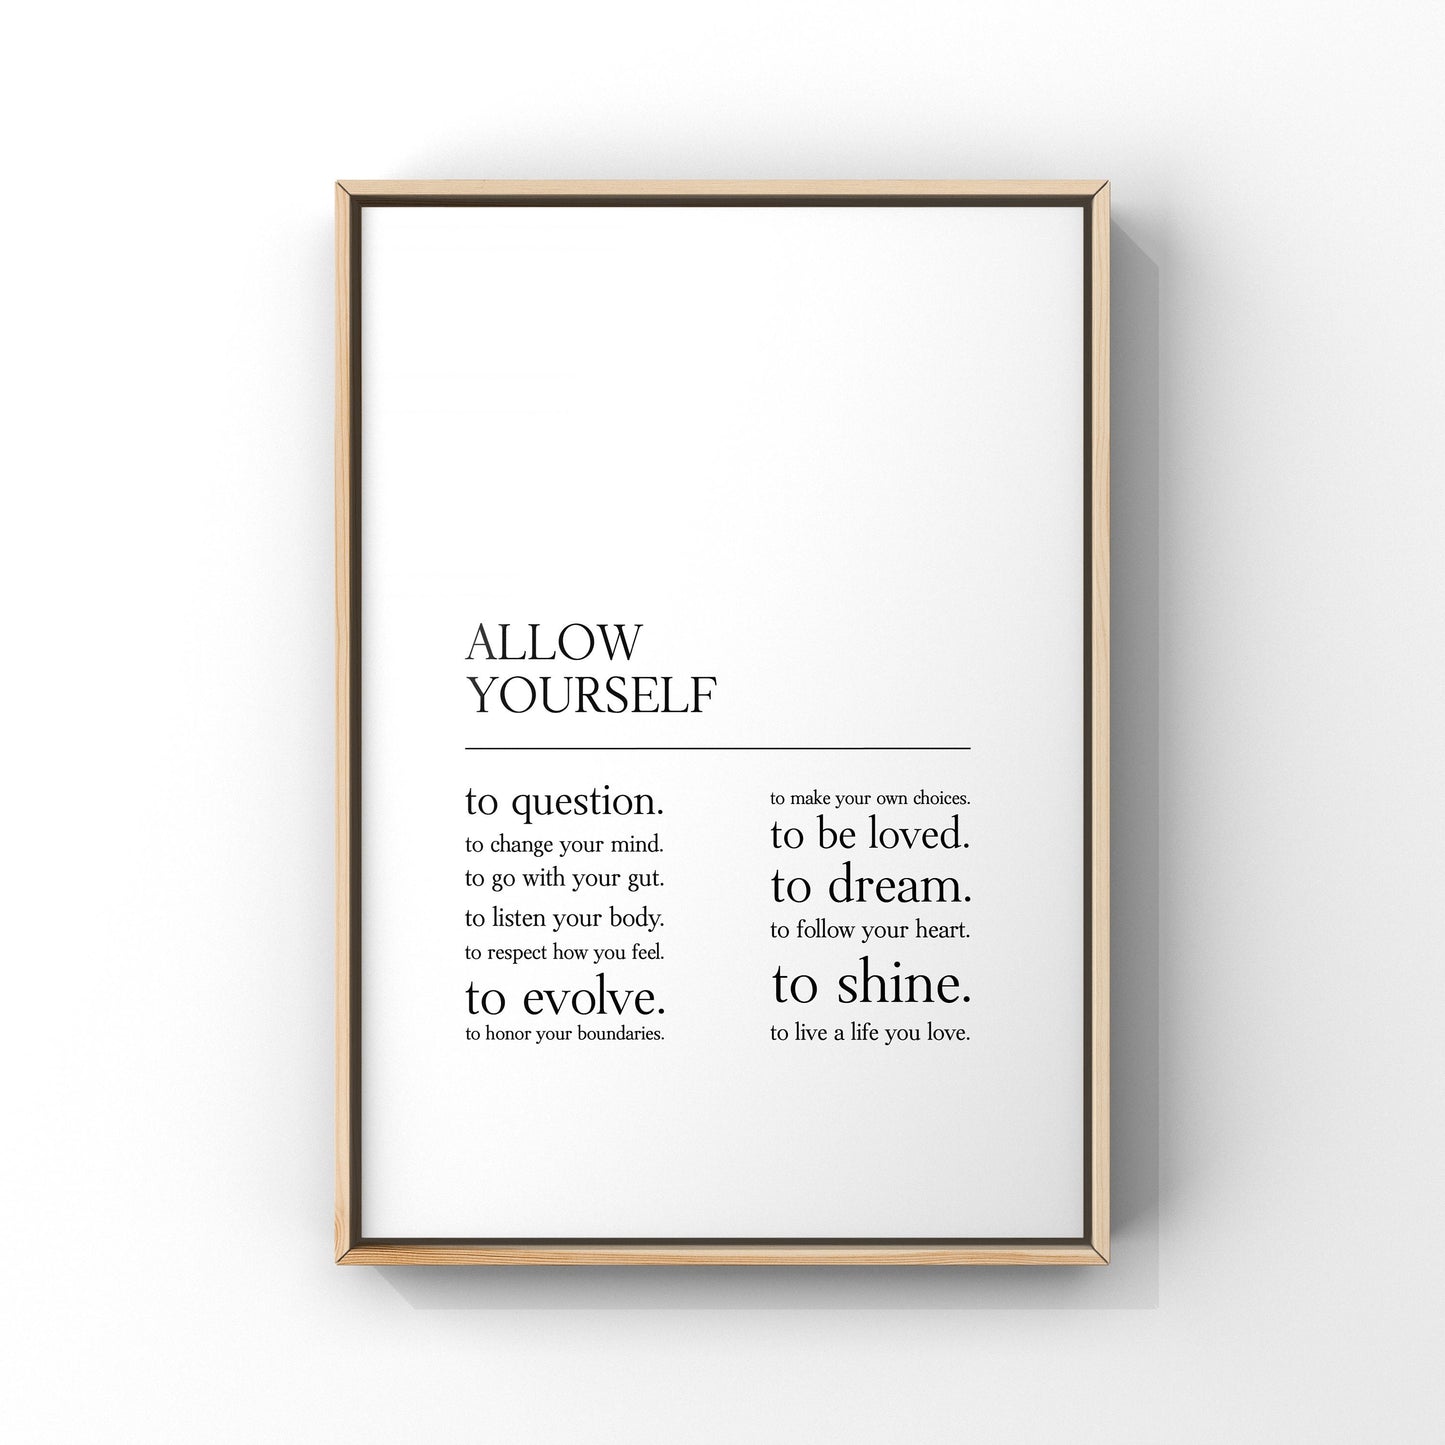 Allow yourself,Inspirational wall art,Motivational quote print,Positive quote,Wall art,Encouragement gift,Mindset,Self-growth,Self-care